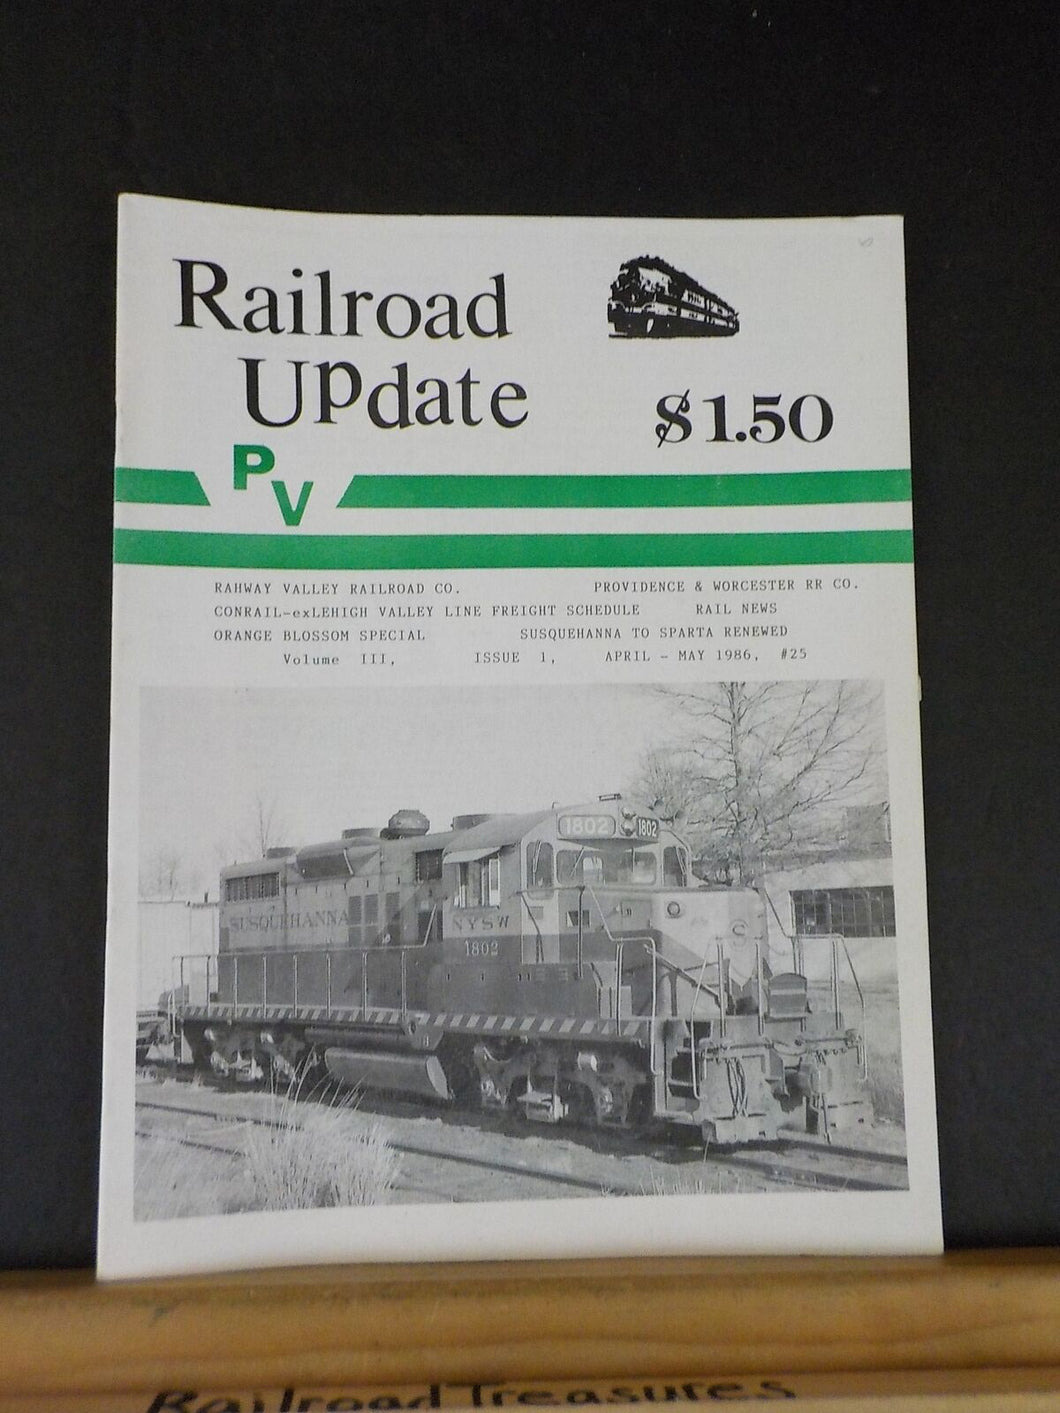 Railroad Update #25 1986 April May Rahway Valley P&W Orange Blossom Special